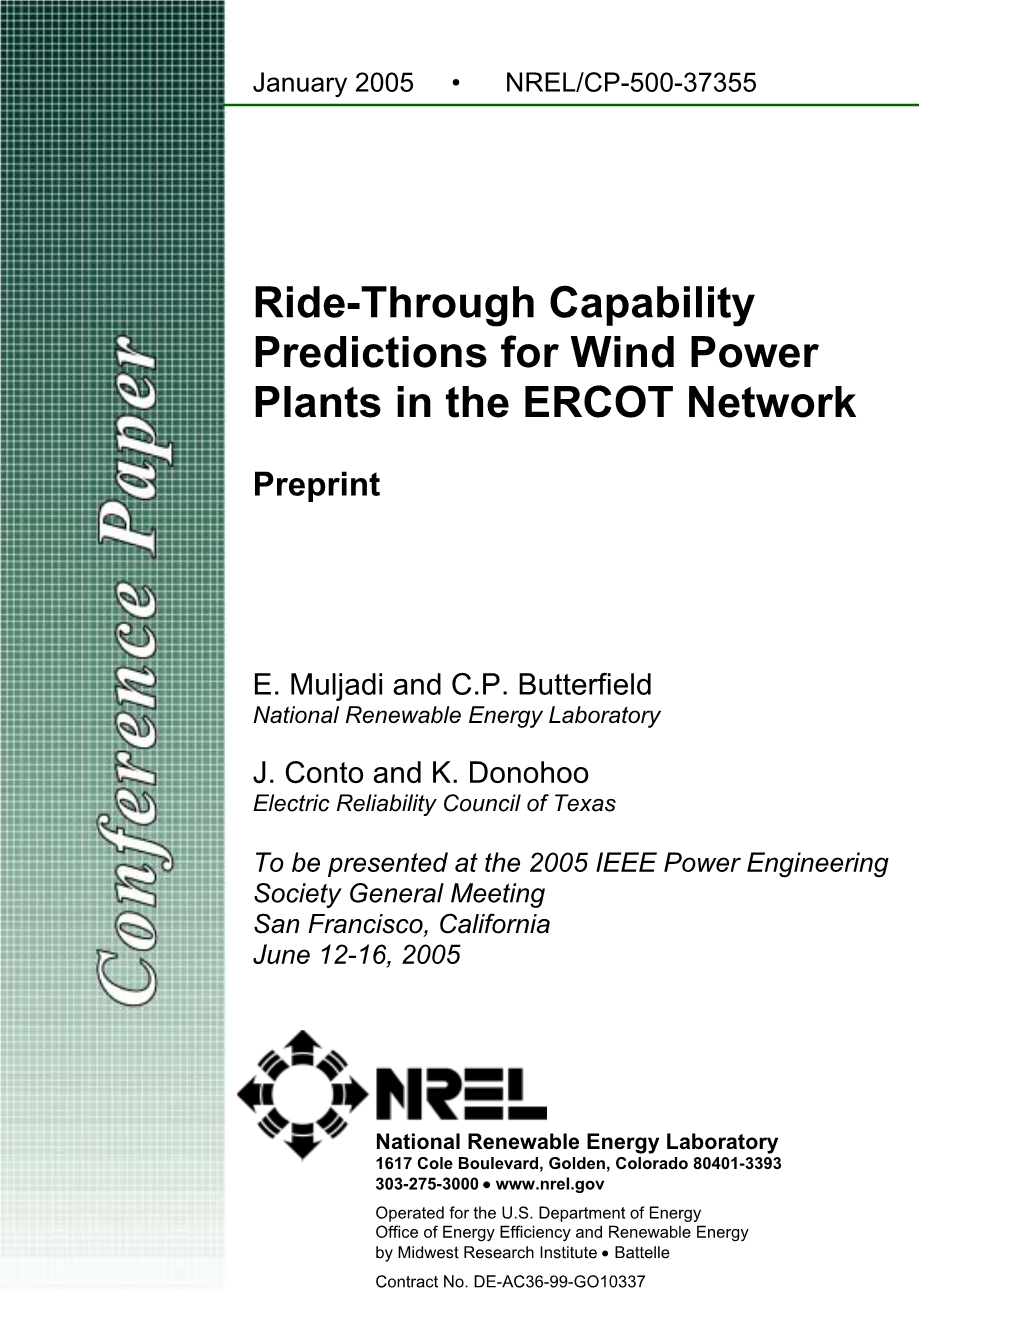 Ride-Through Capability Predictions for Wind Power Plants in the ERCOT Network